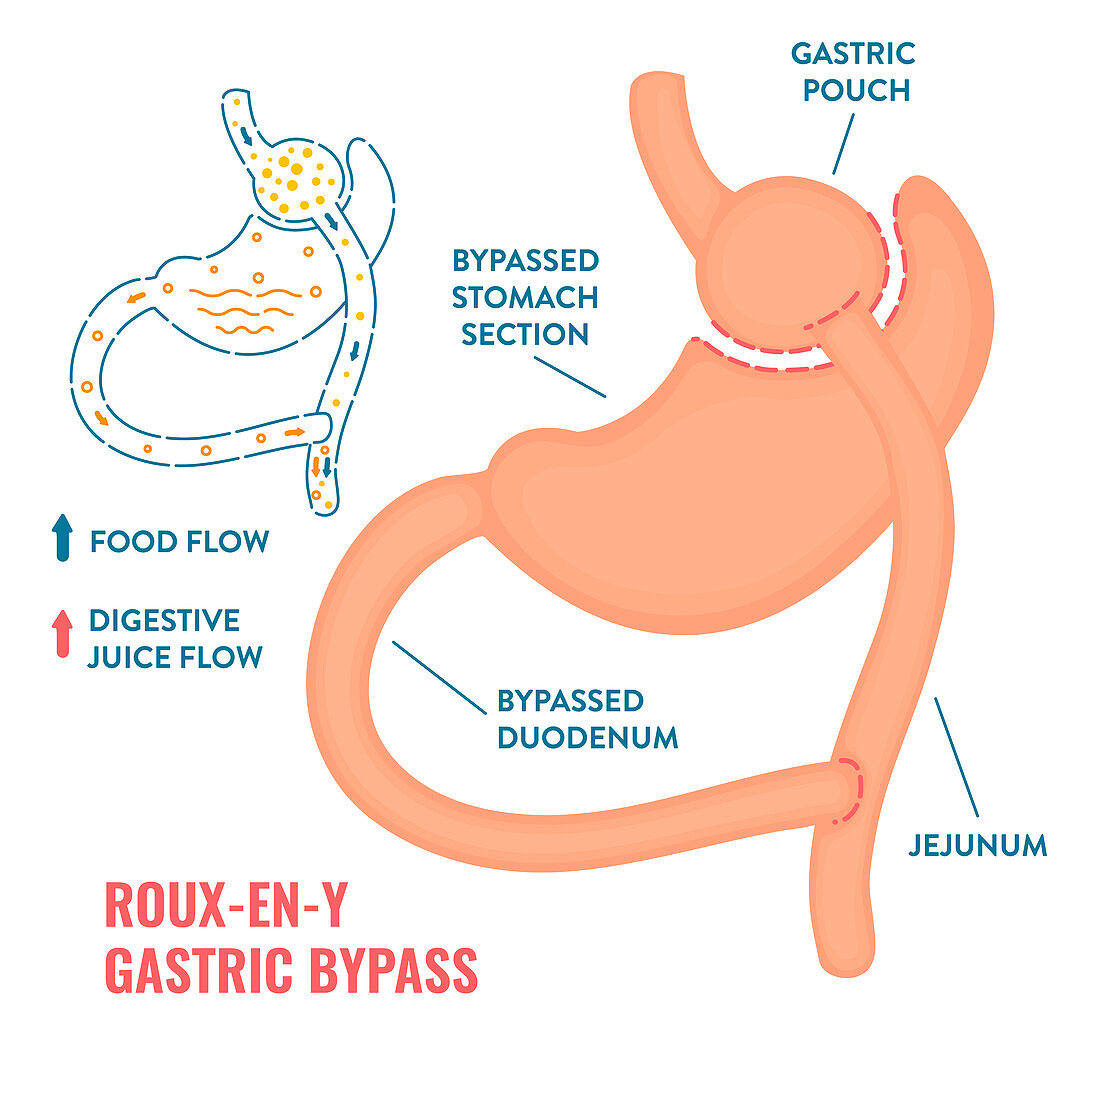 Roux-en-Y gastric bypass bariatric surgery, illustration